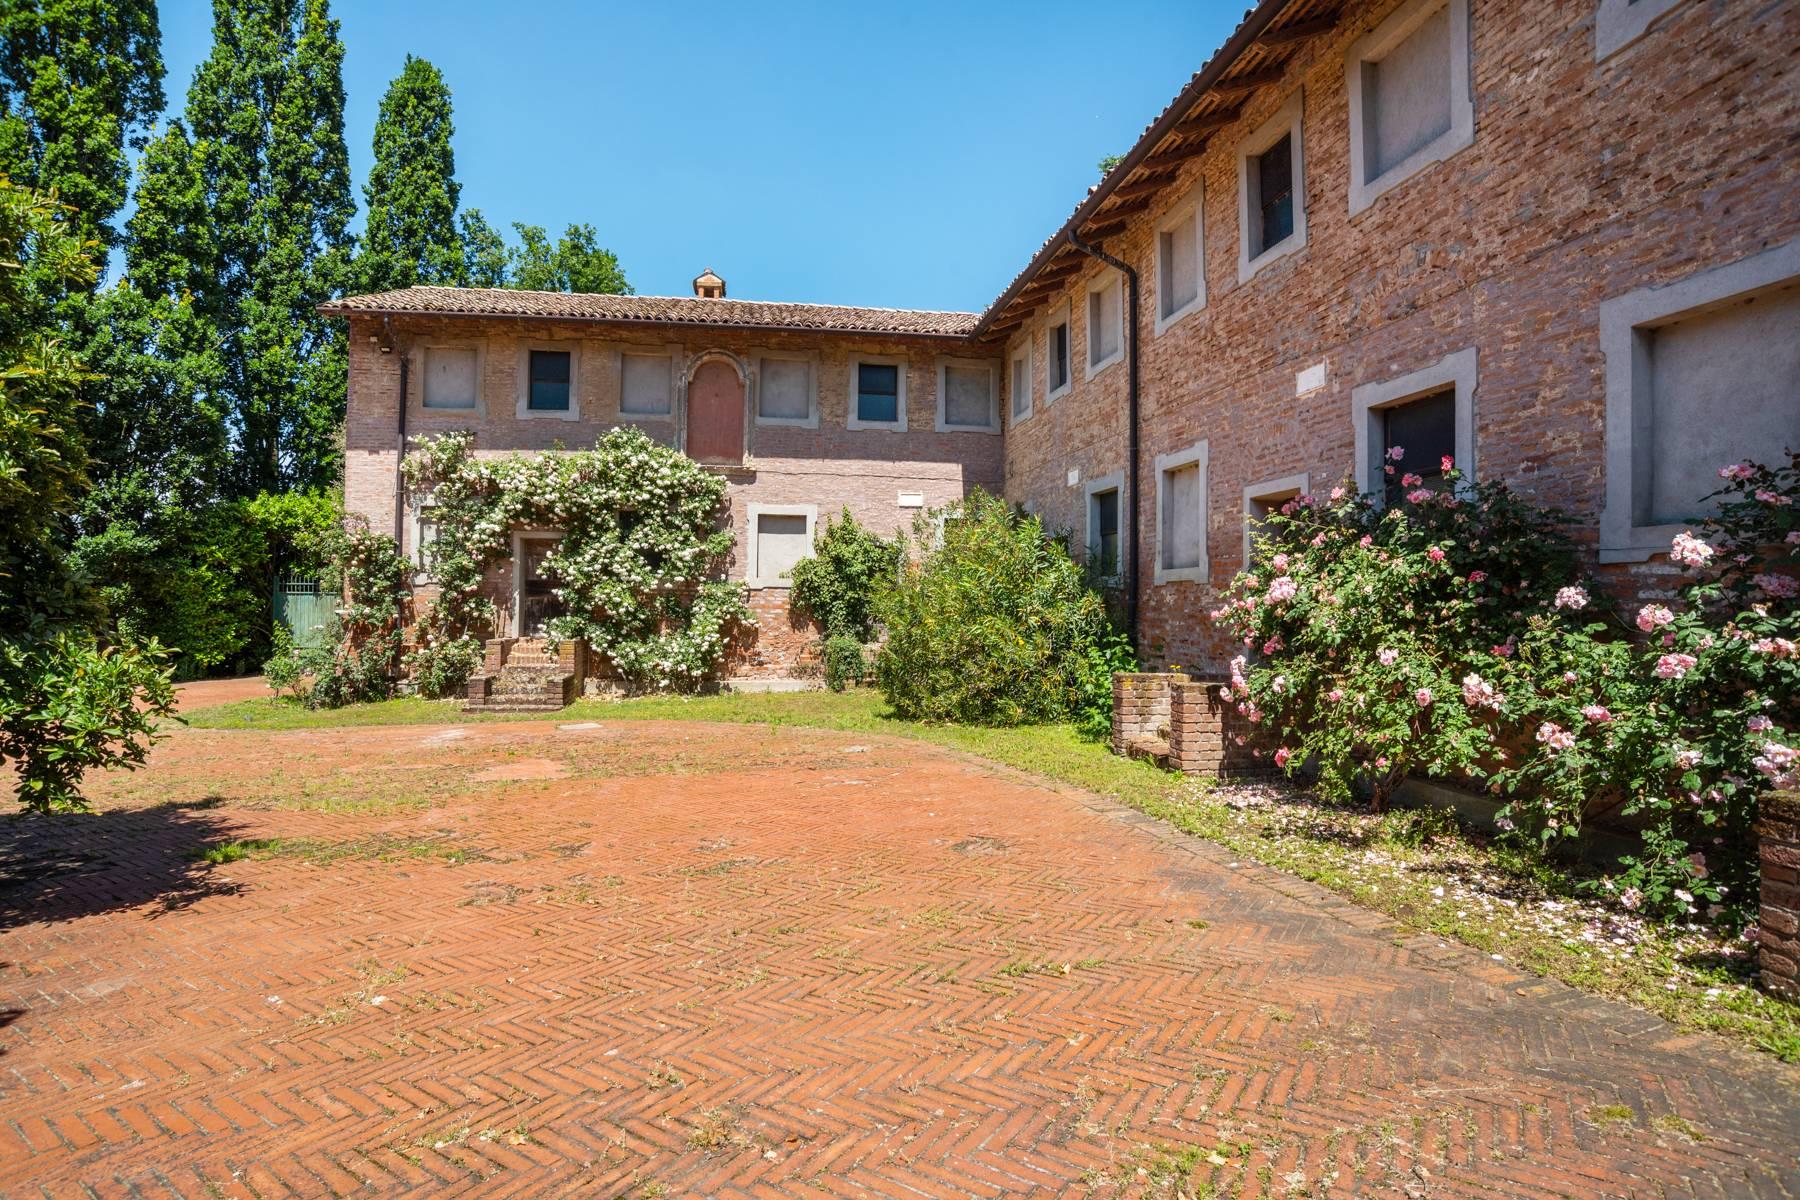 Magnificent property surrounded by greenery in Pavia - 10